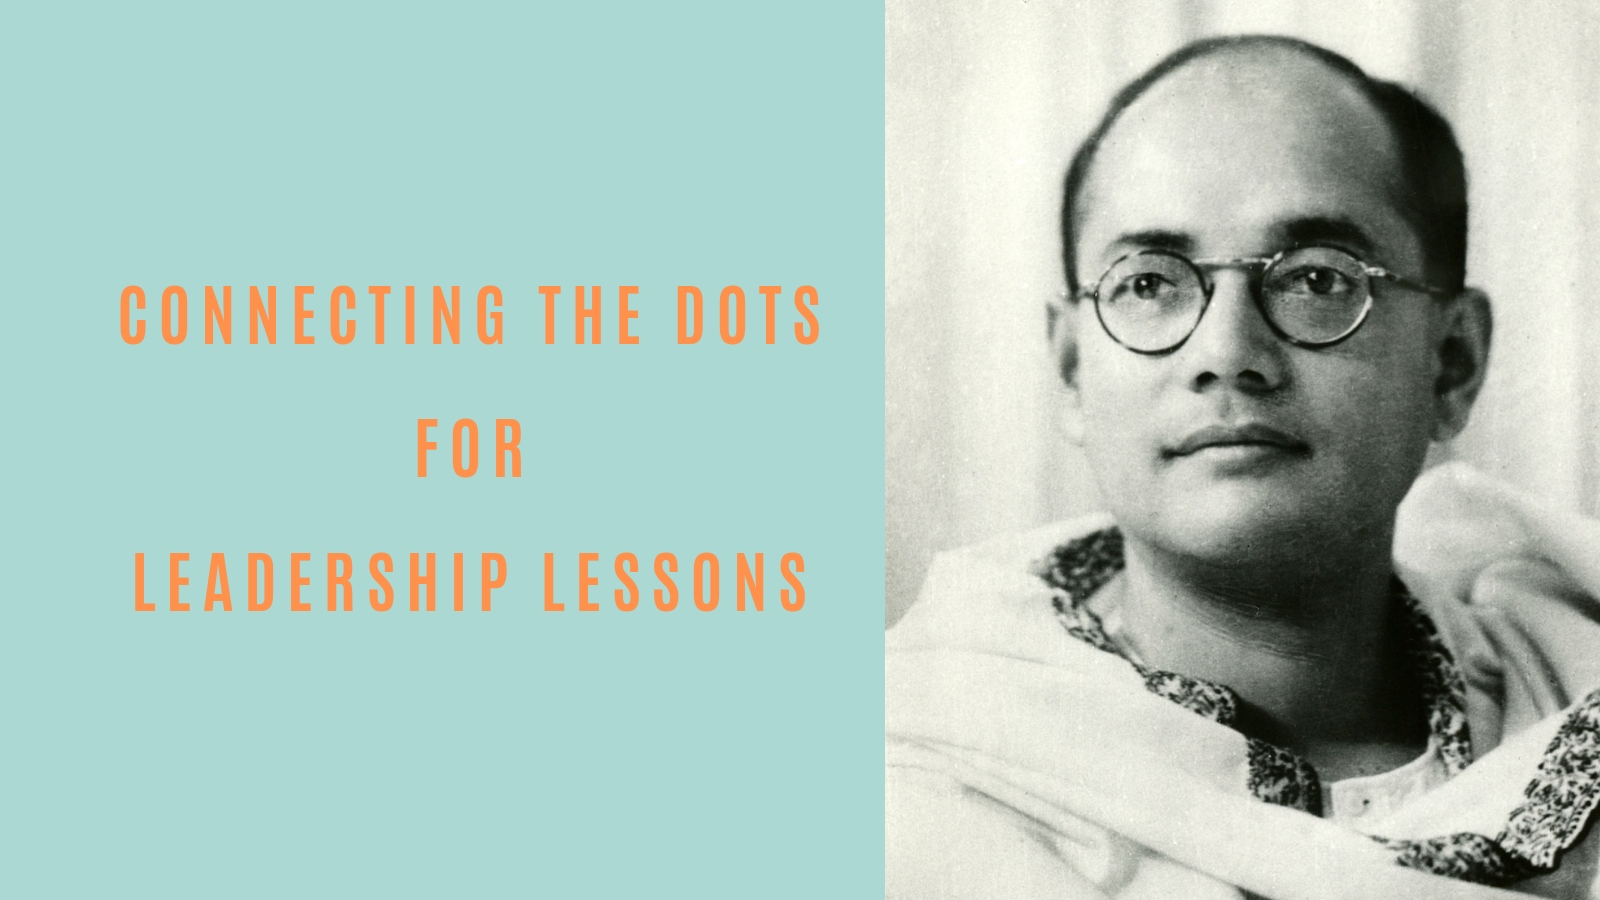 Connecting the Dots for Leadership Lessons - by Naveen Lakkur